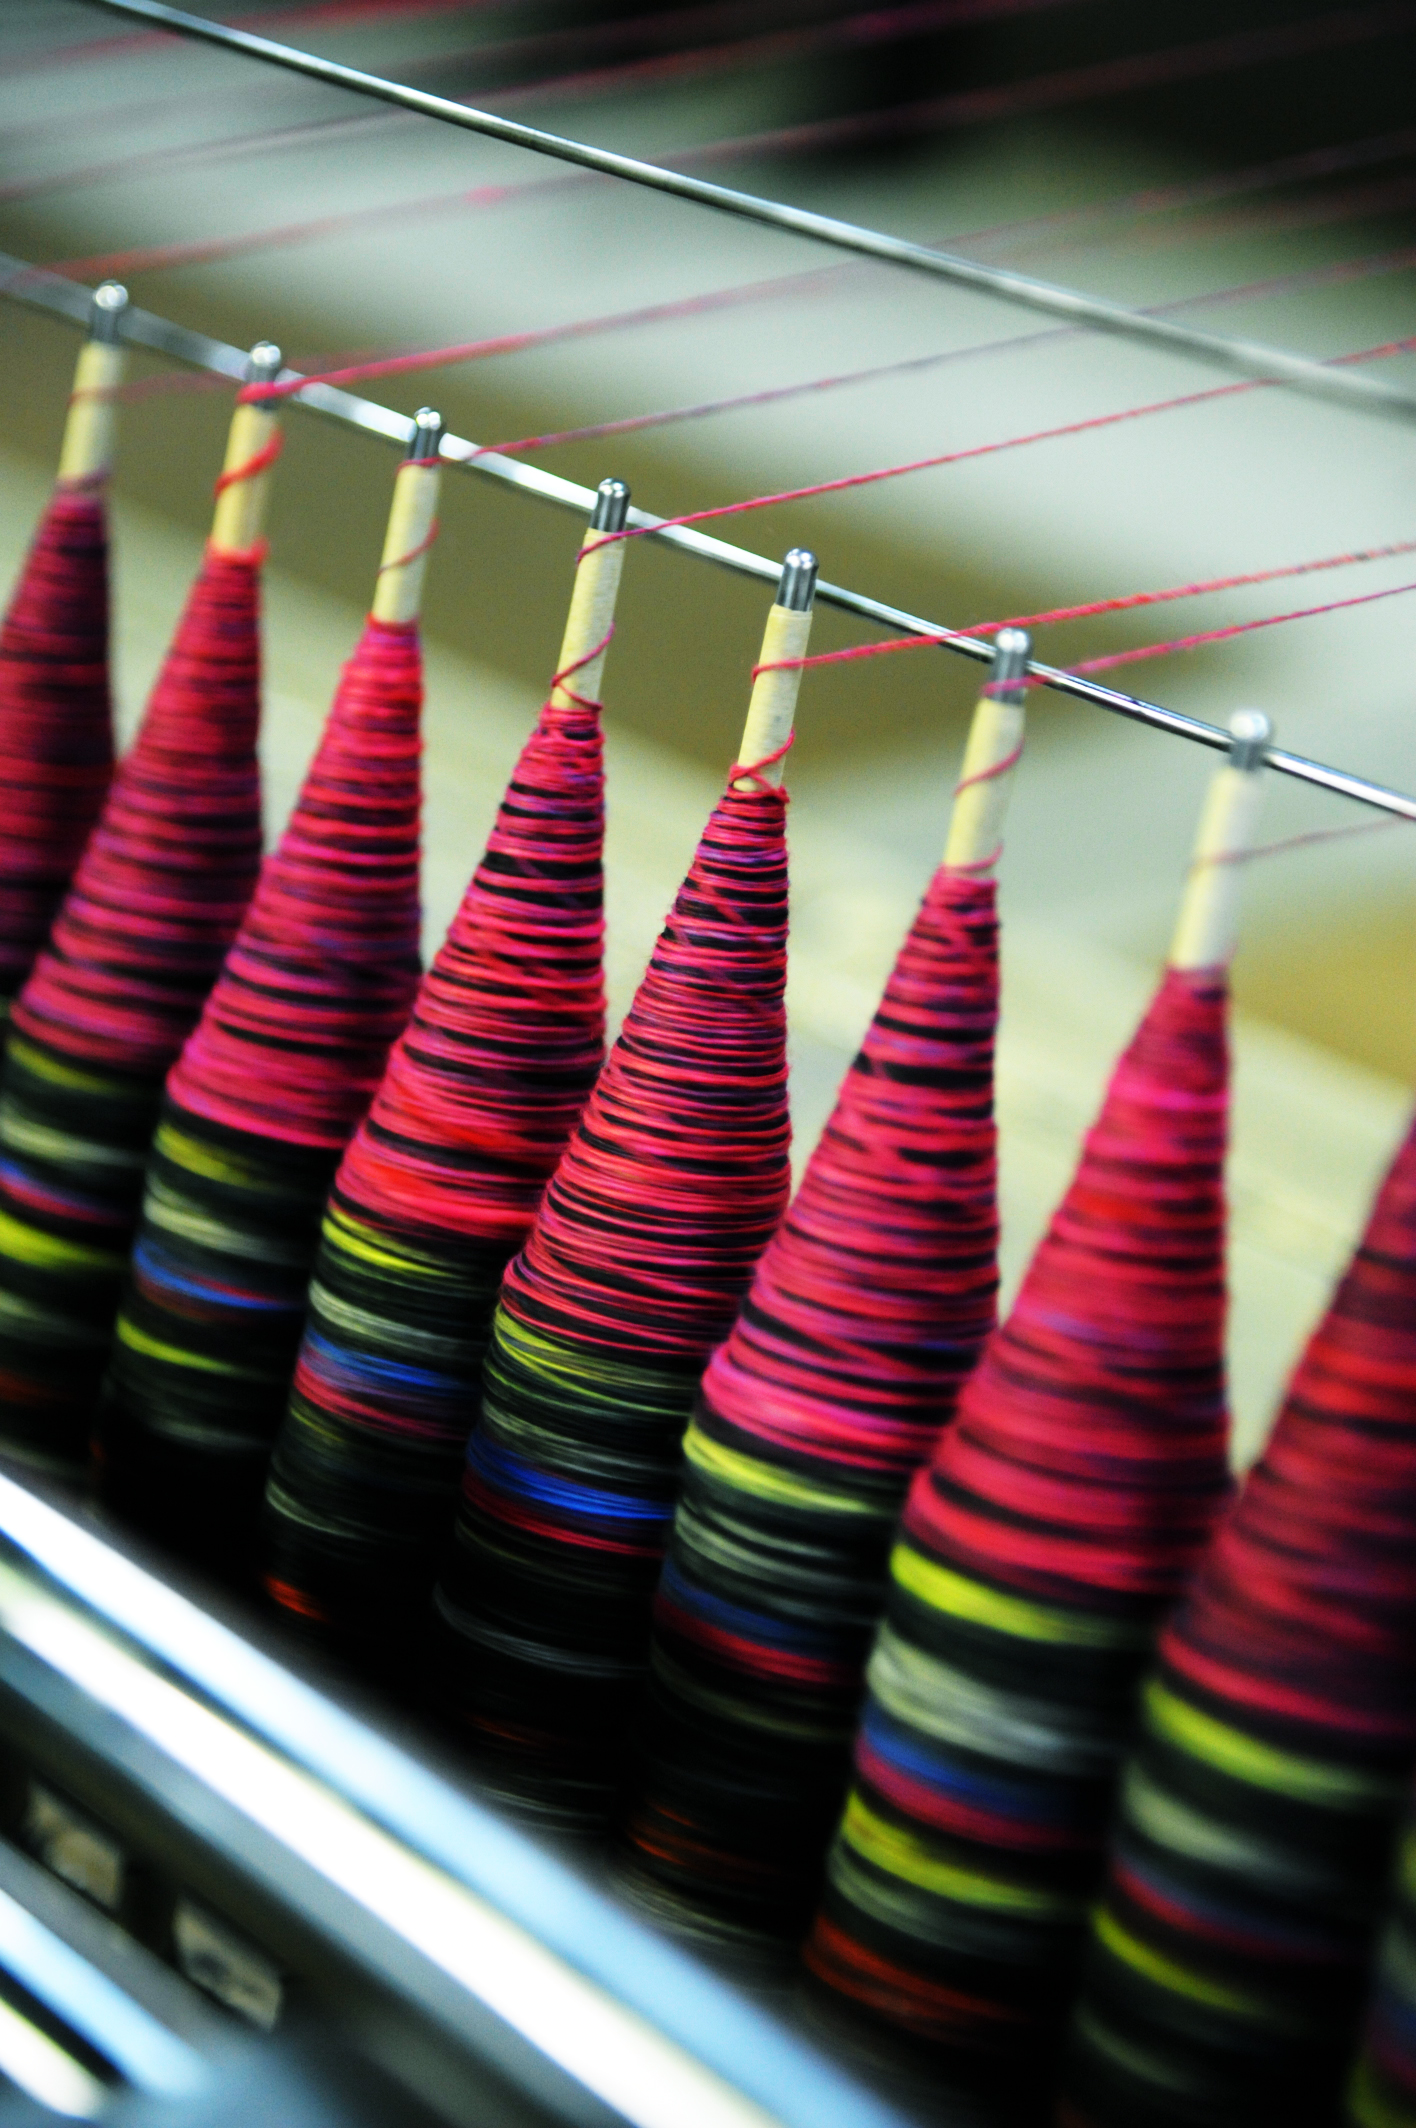 5--Mule Spinning - yarns being twisted and wound on bobbins